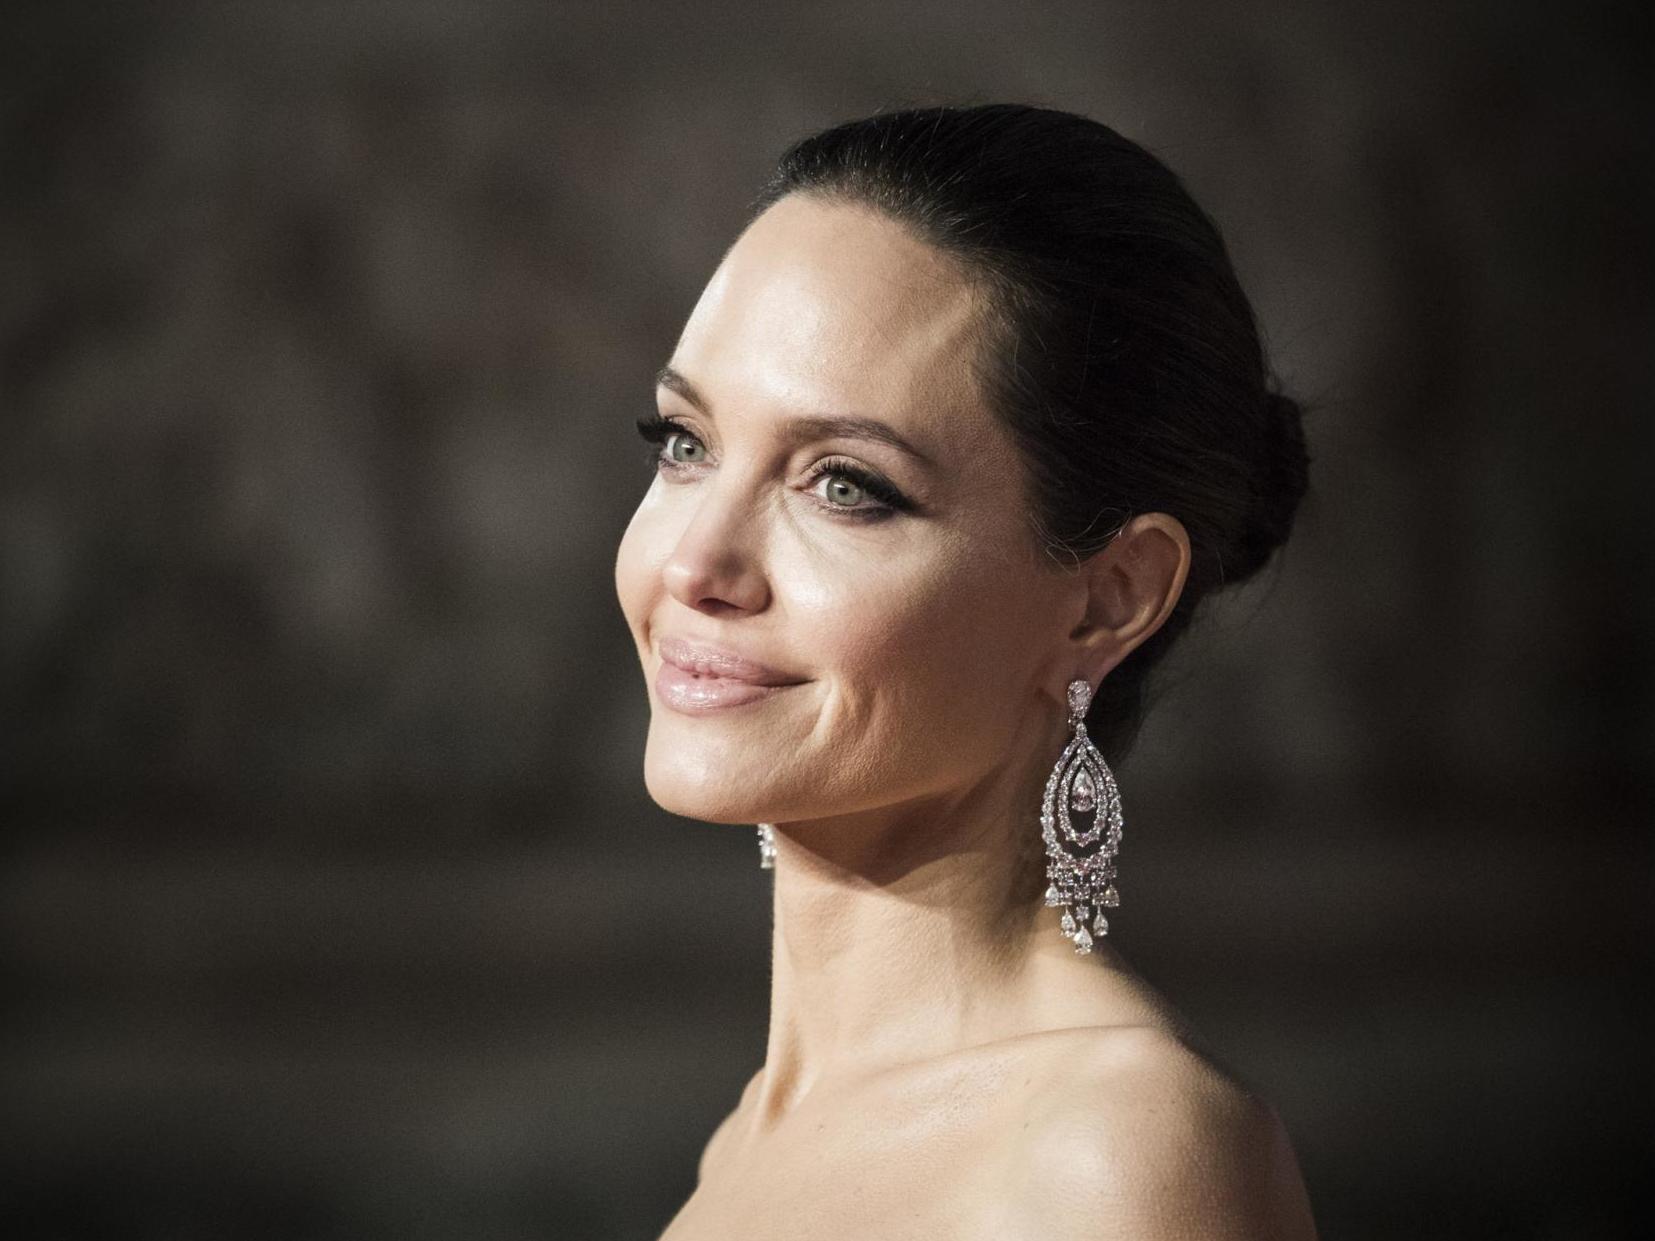 Angelina Jolie is waiting for the right man to meet her high standards